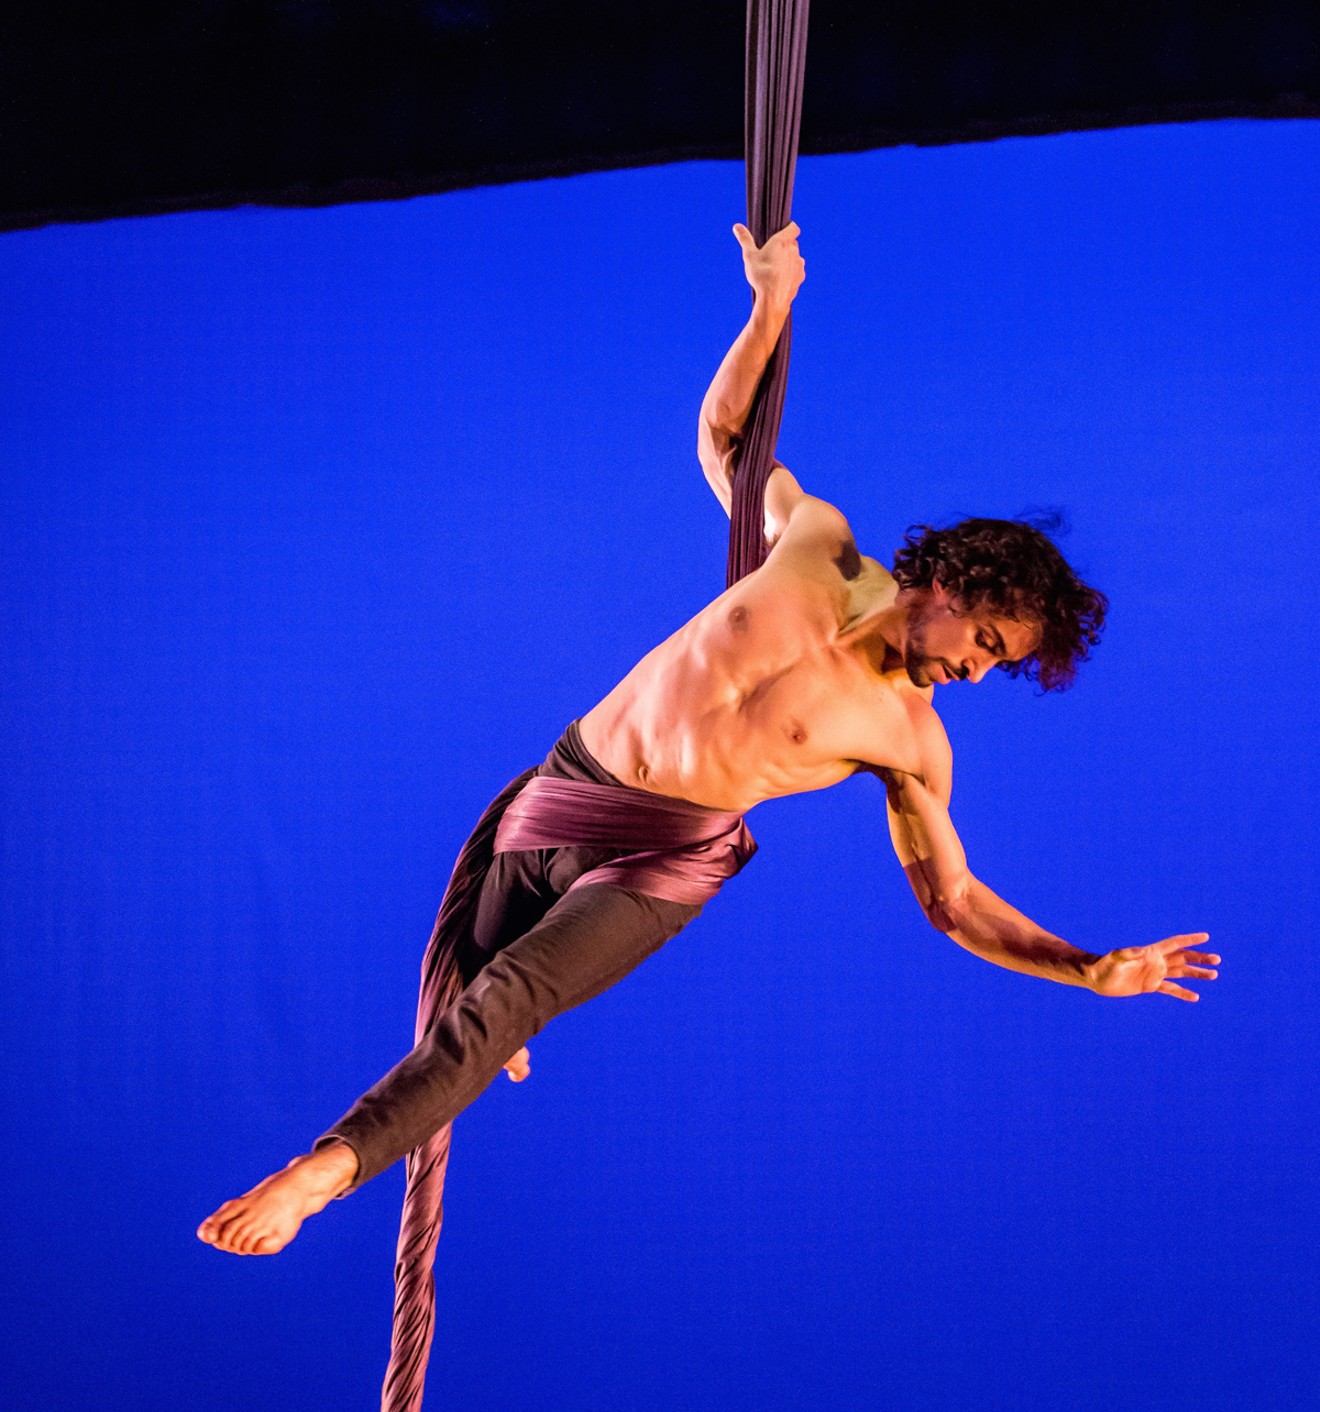 Teo Spencer at the Aerial Dance Festival.